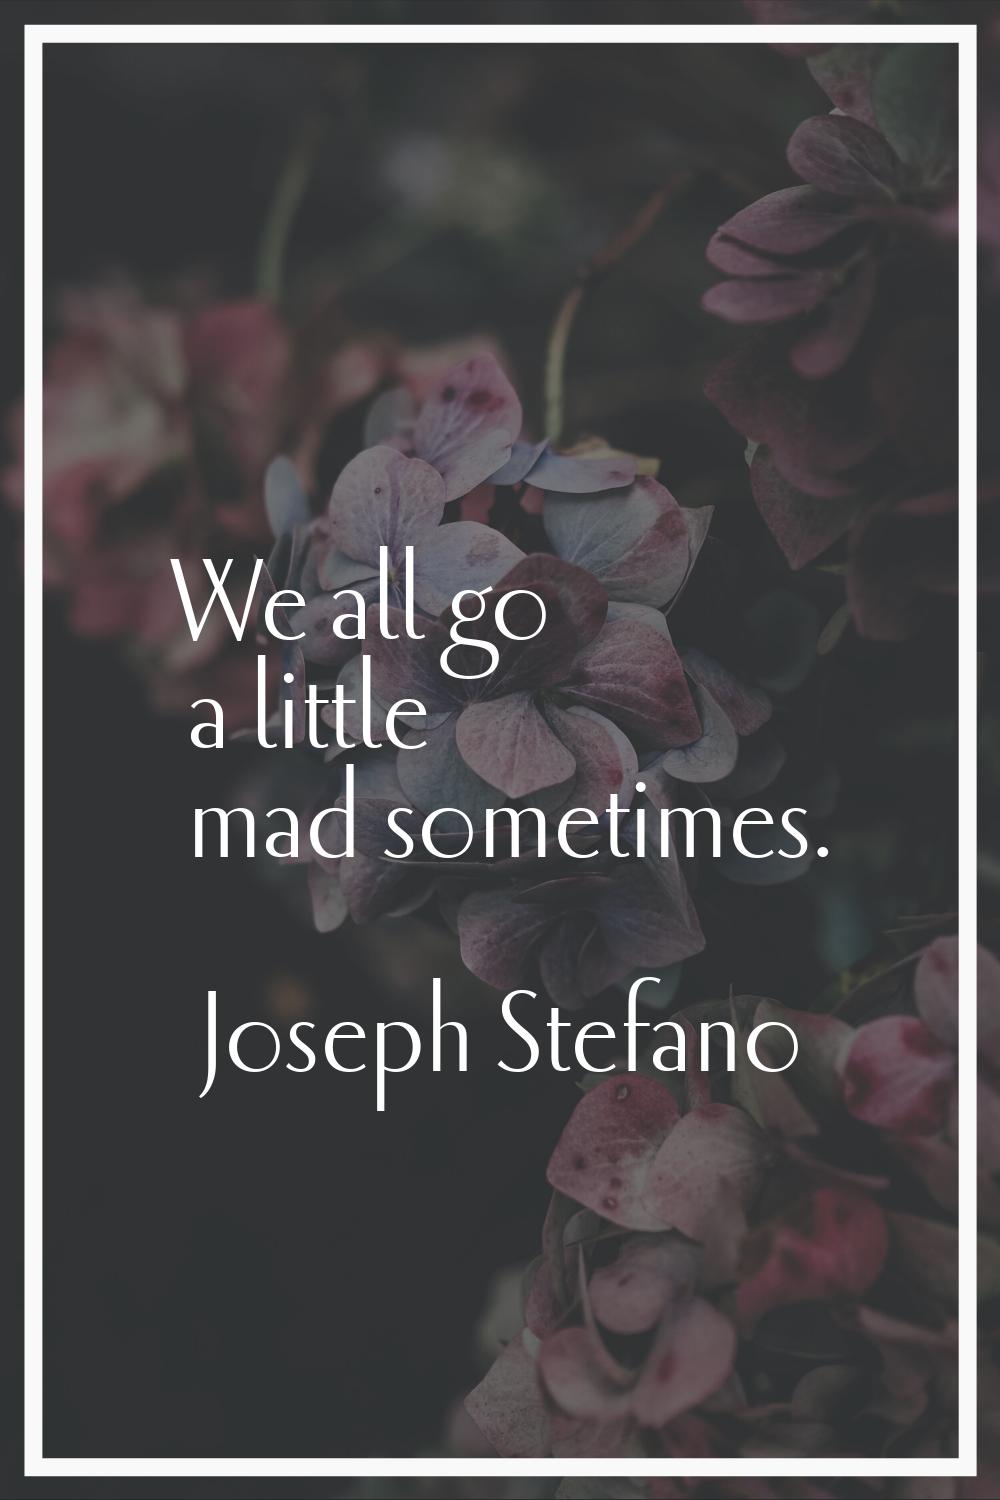 We all go a little mad sometimes.